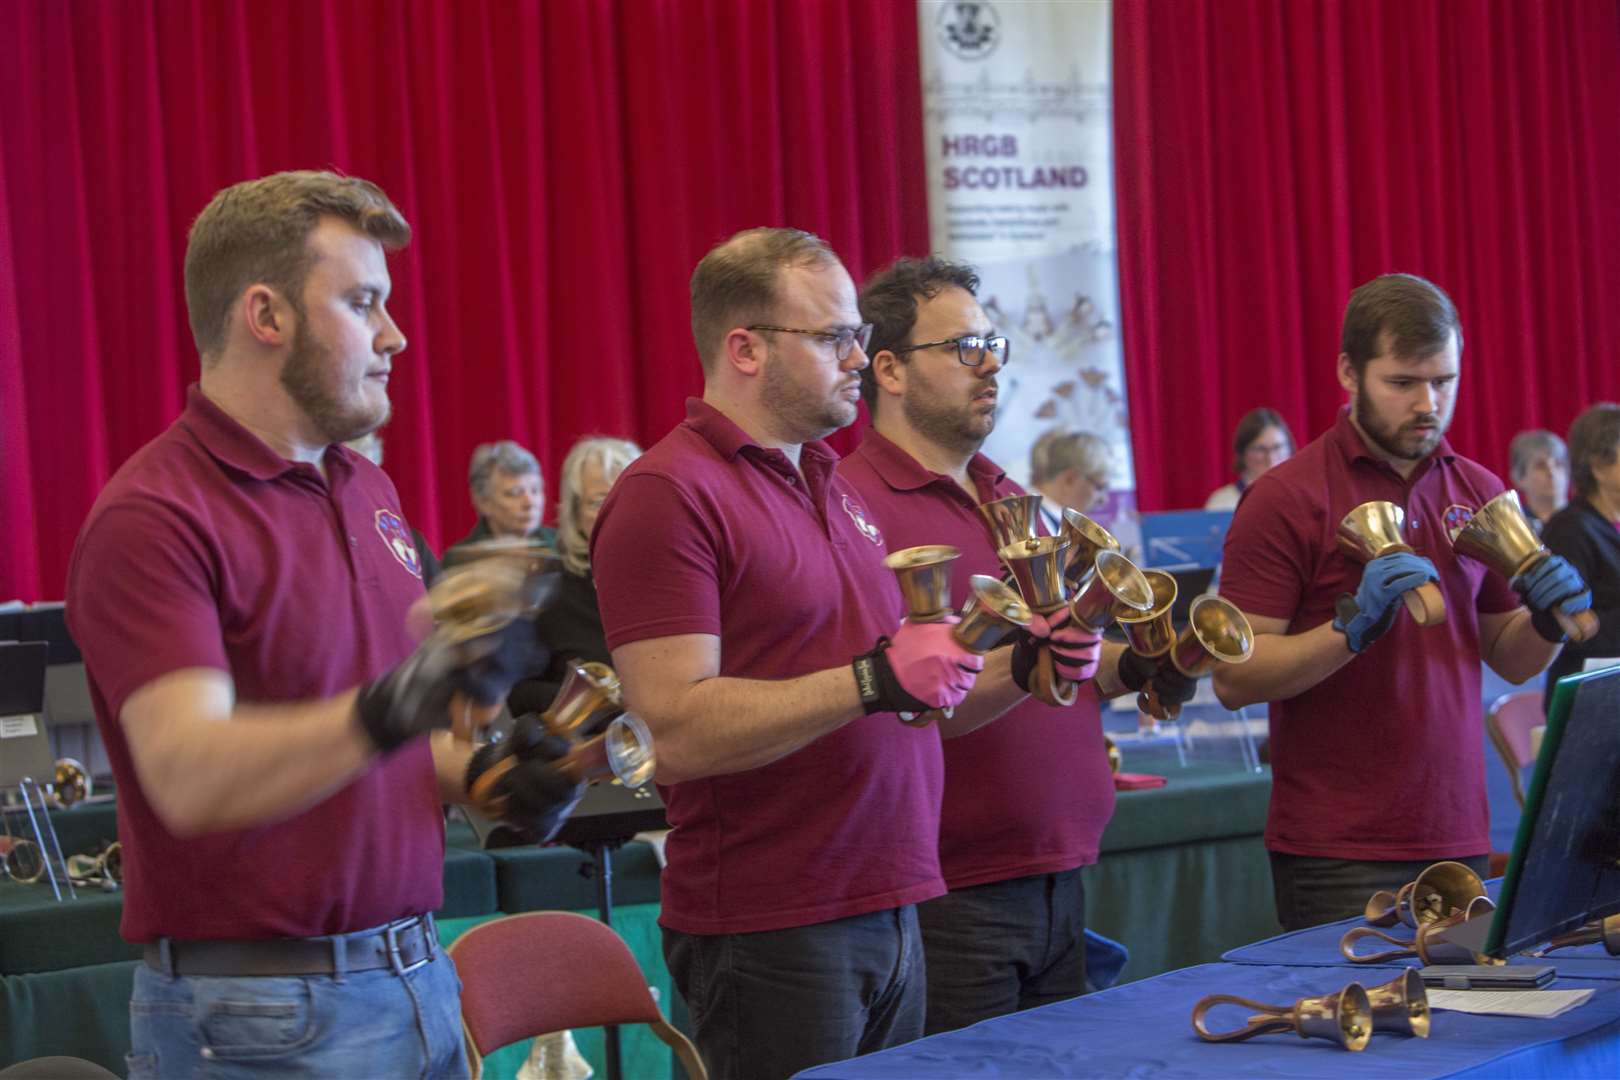 Among the farthest-travelled and the most skilled handbell ringers were Tintinnabulis, from Herefordshire. They are one of the few groups of ringers who master playing two bells in each hand. Picture: Robert MacDonald / Northern Studios